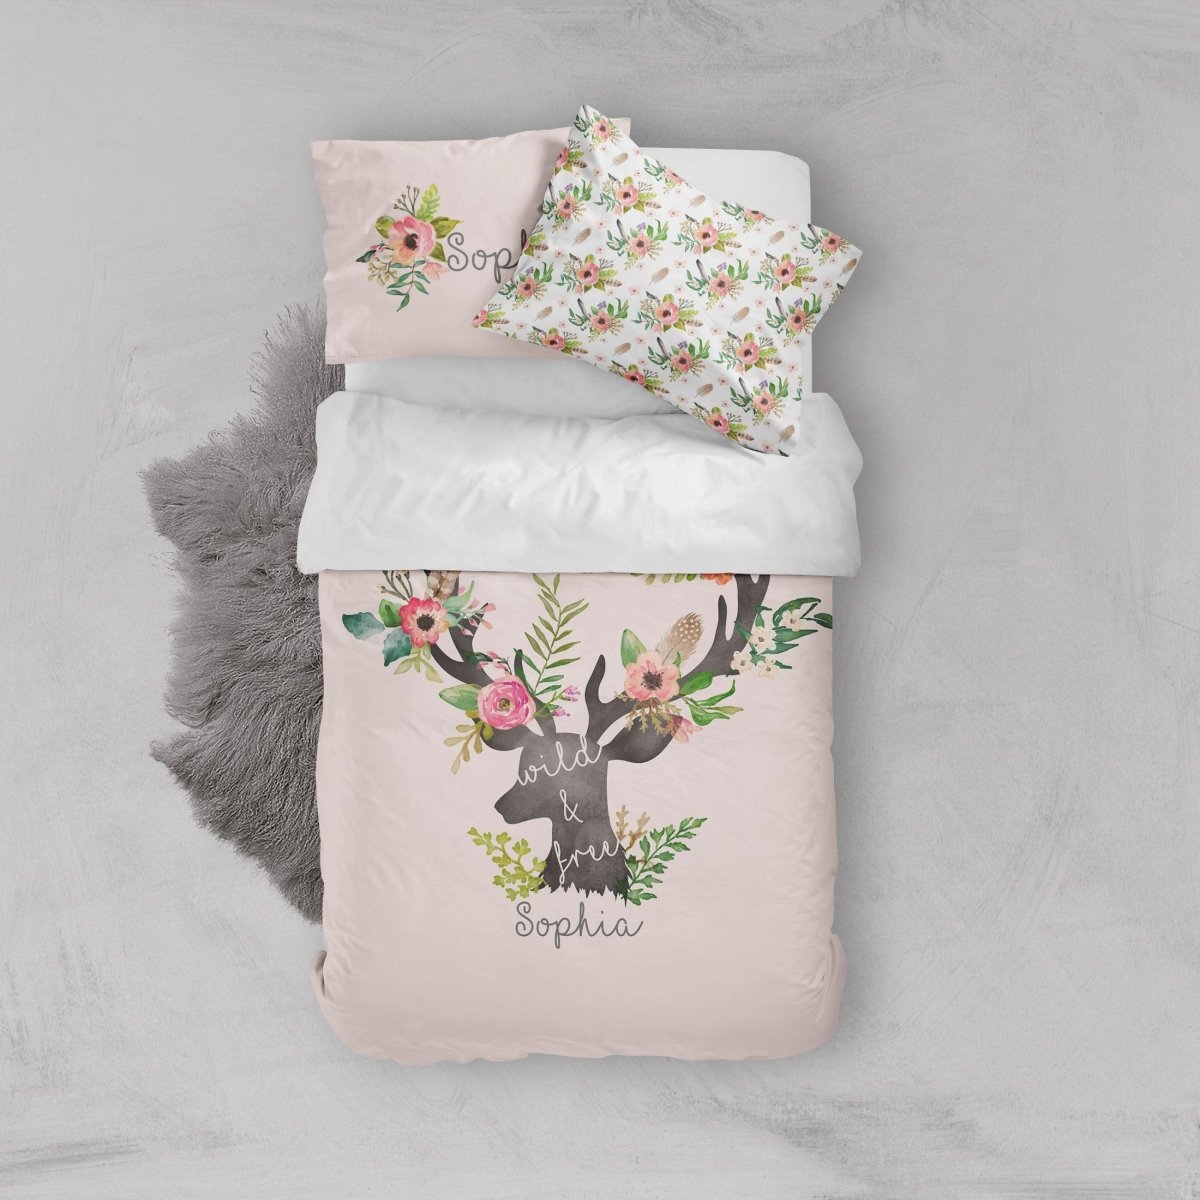 Wild and Free Kids Bedding Set (Comforter or Duvet Cover) - text, ,